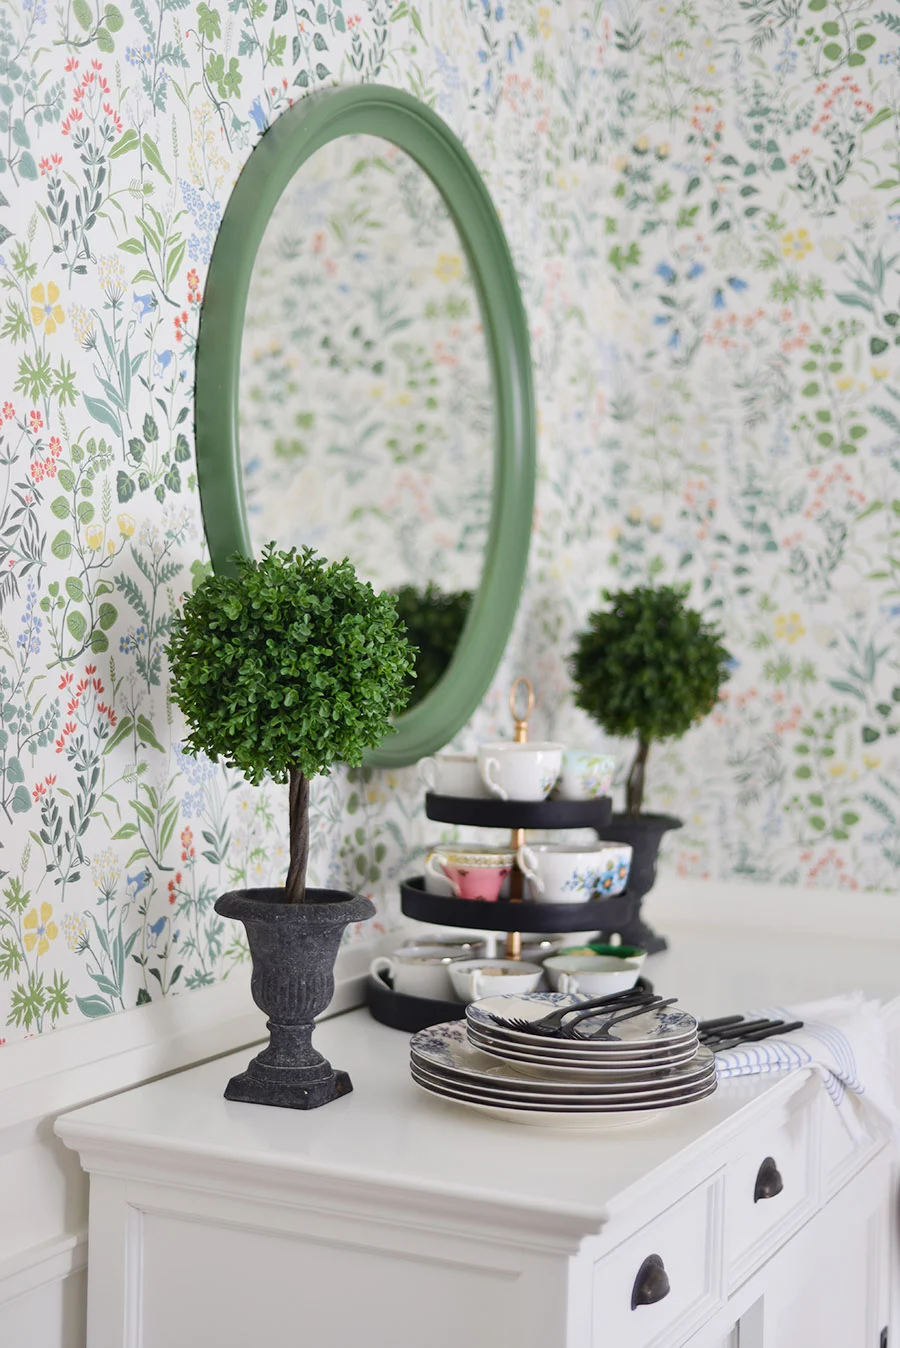 spring decorations for the home, Scandianvian Borastapeter flora white wallpaper, green round mirror, buffet display, faux topiary